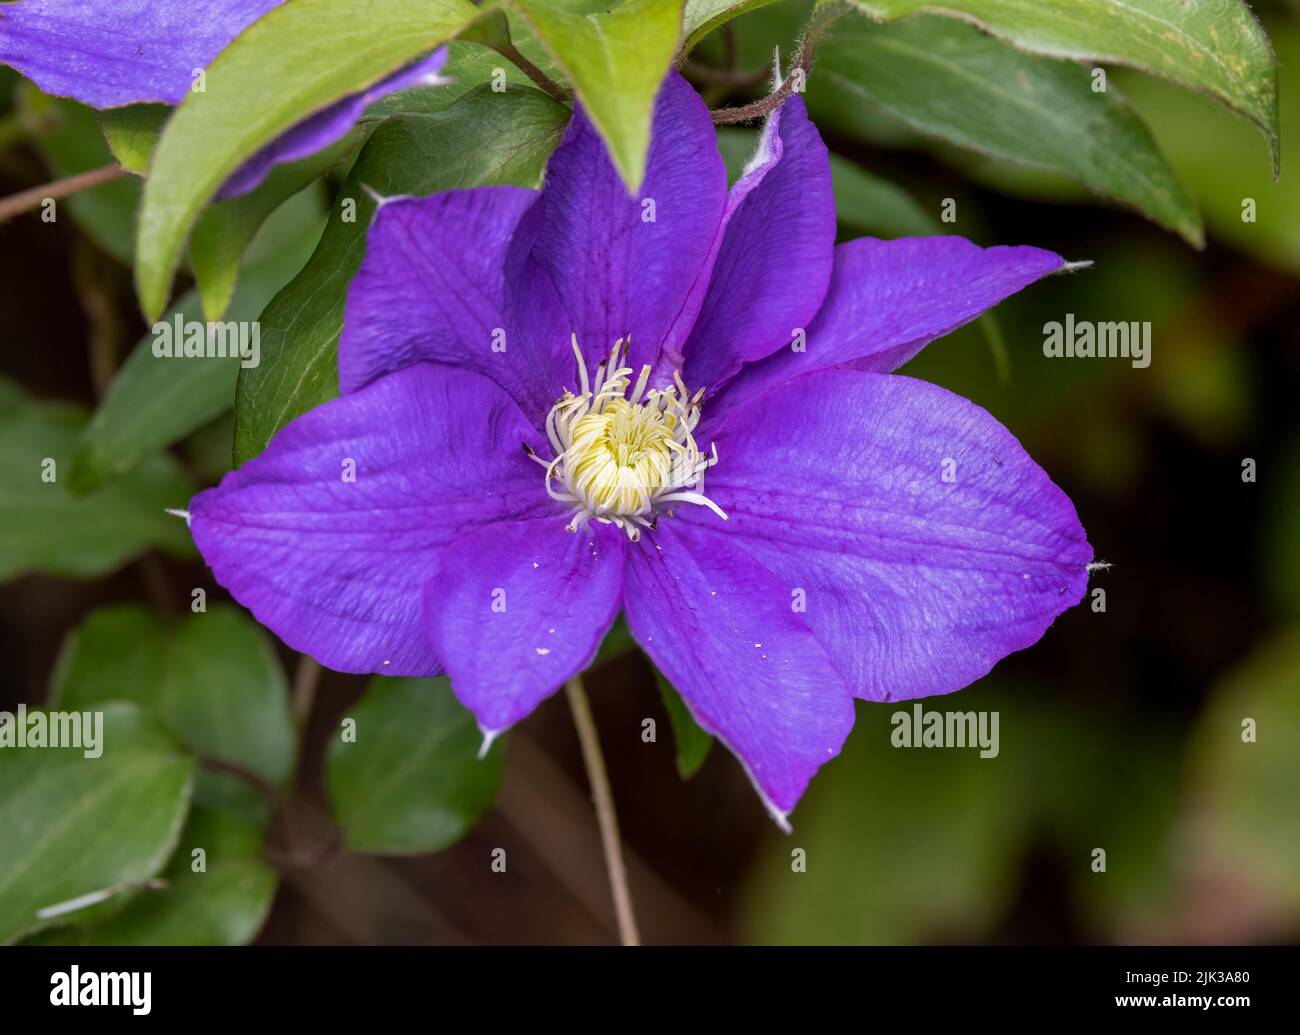 A close up of a beautiful, deep purple coloured Clematis flower Stock Photo